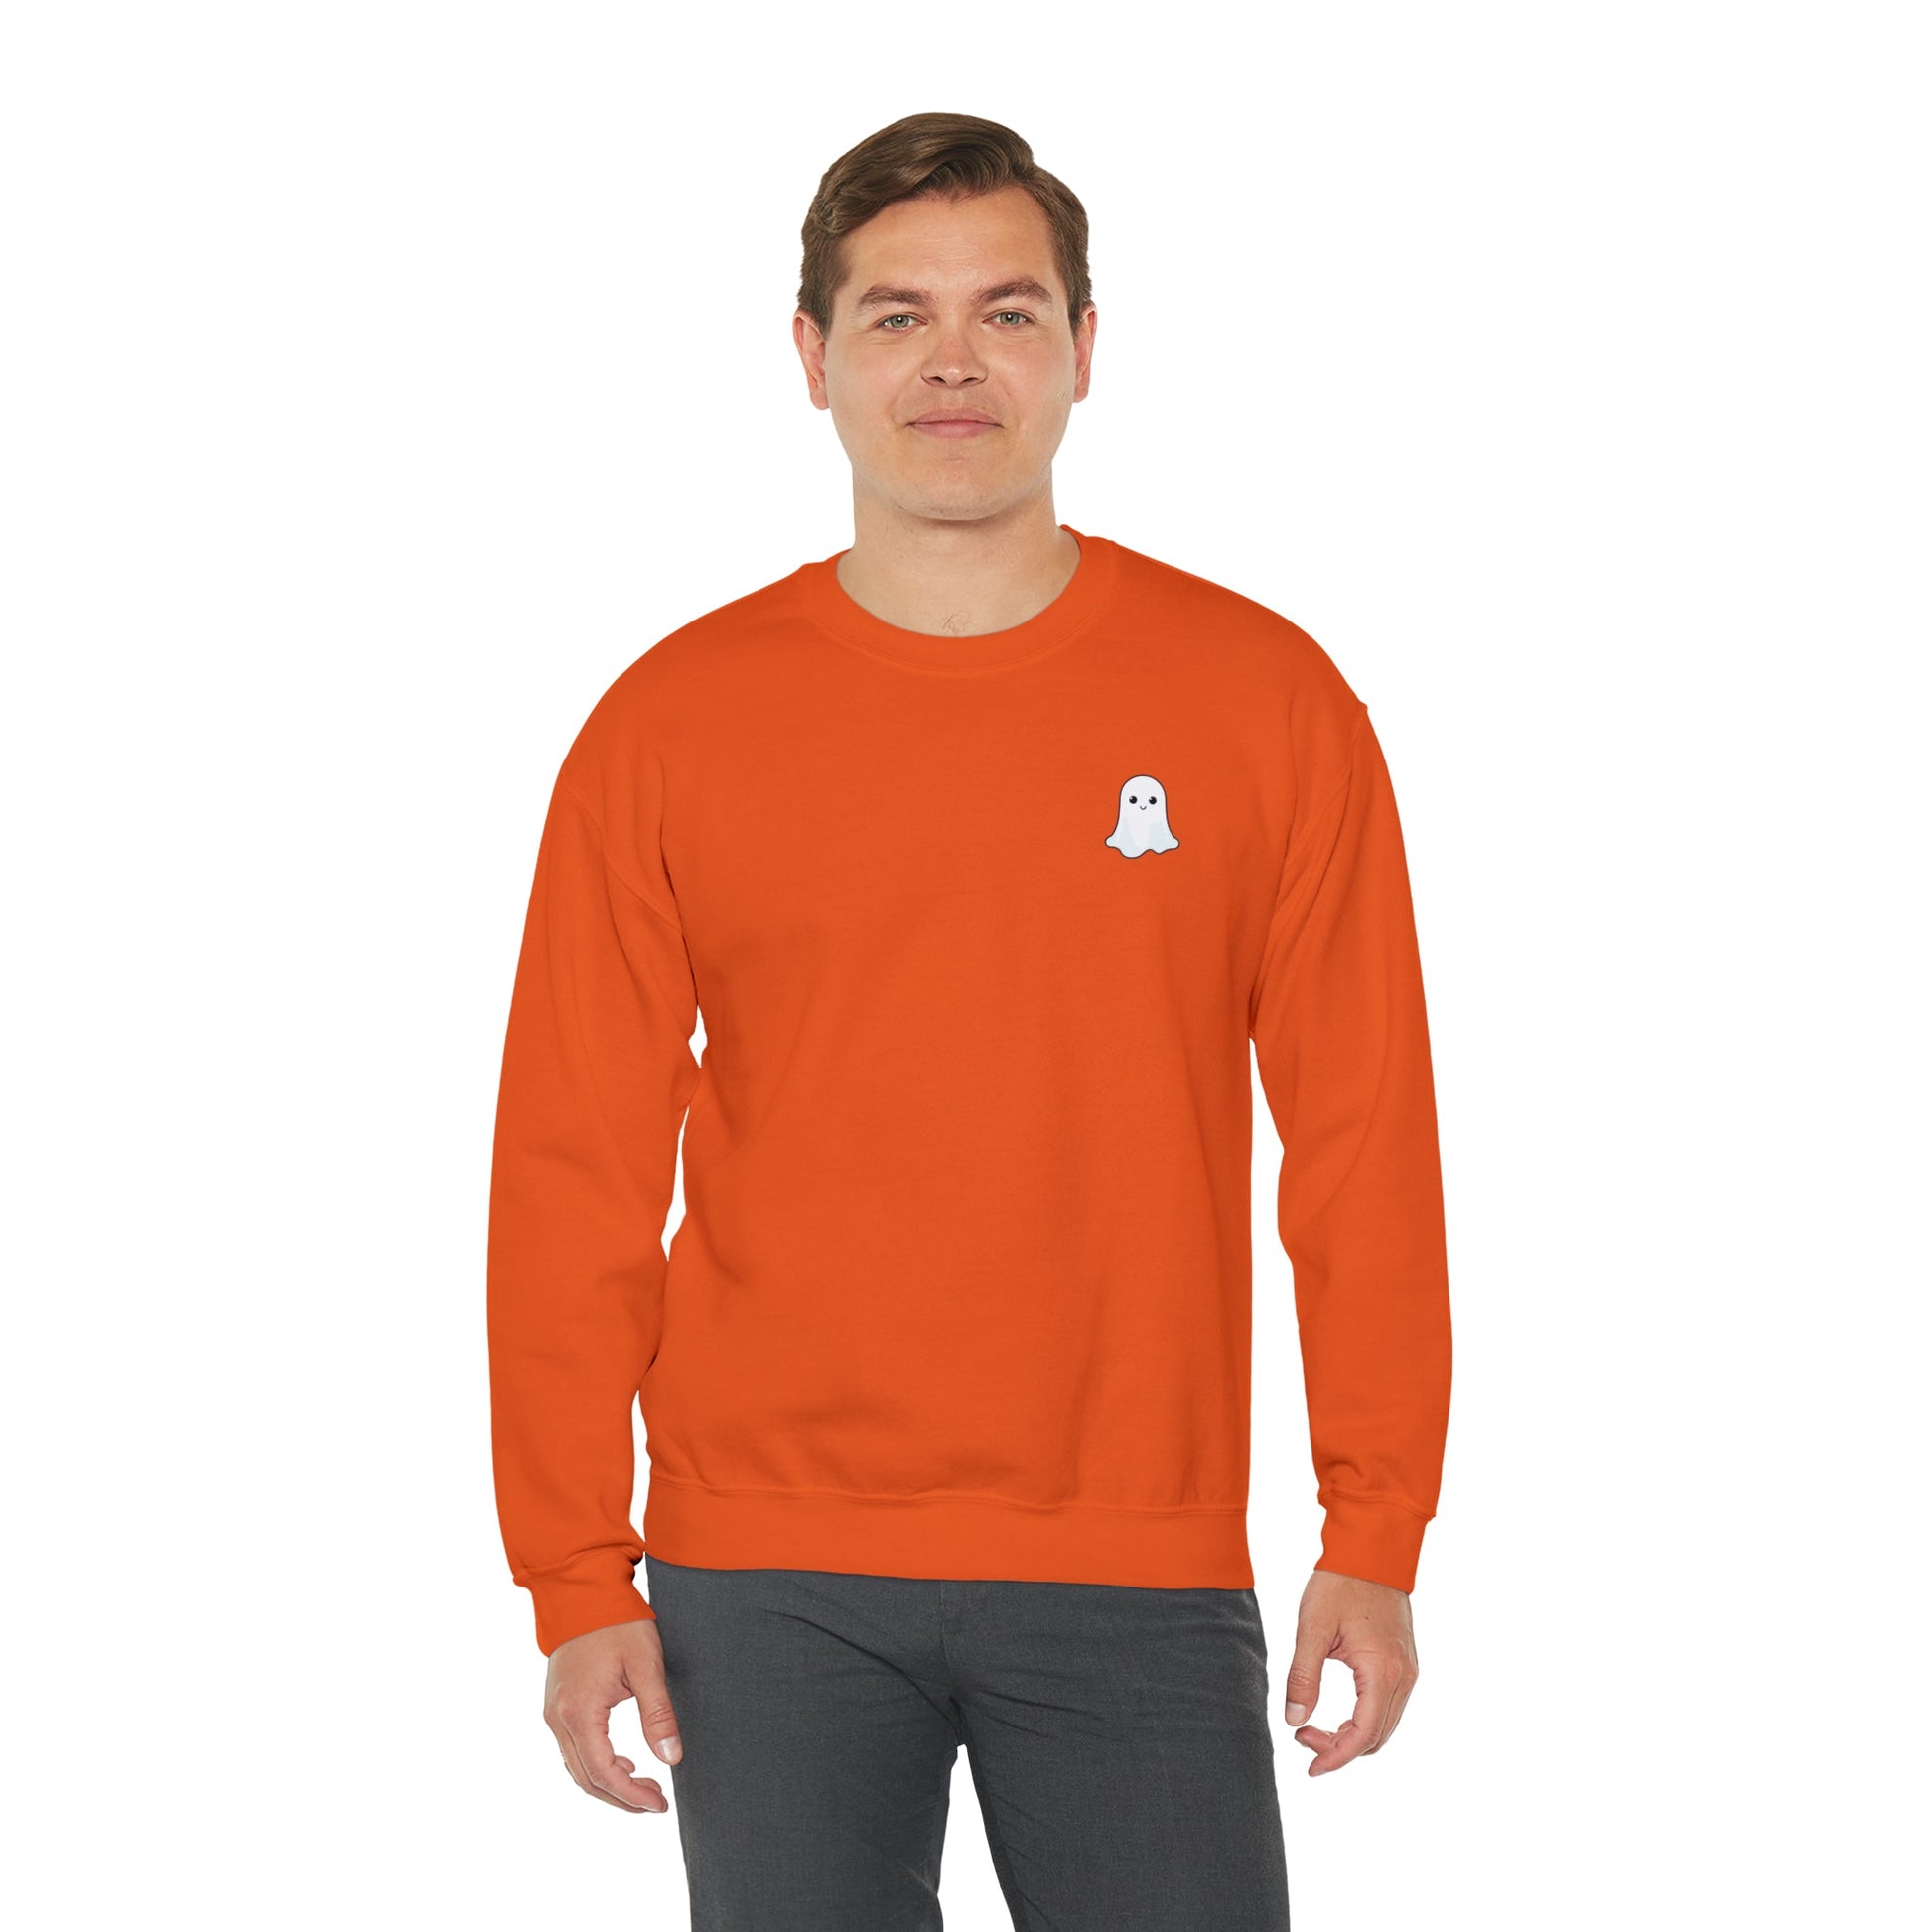 Get trendy with Ghost Sweatshirt - Sweatshirt available at Good Gift Company. Grab yours for $38 today!